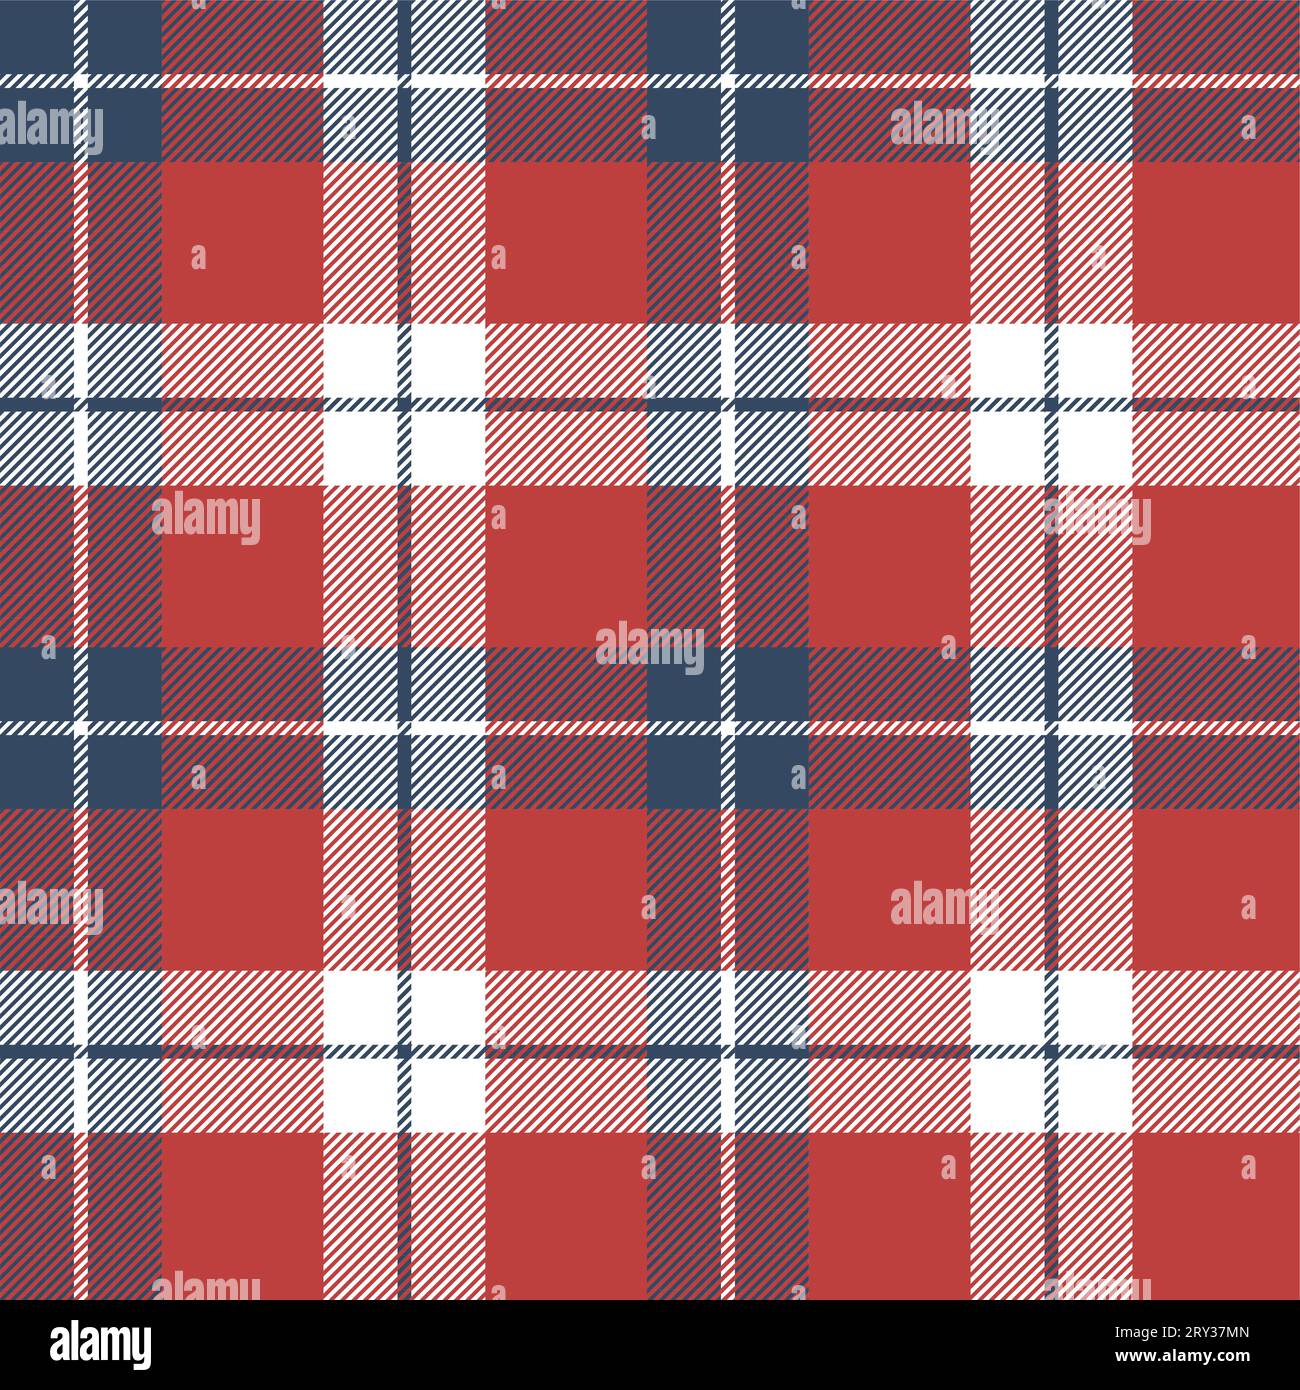 Plaid (tartan) seamless pattern. Red, blue, and white color. Stock Vector